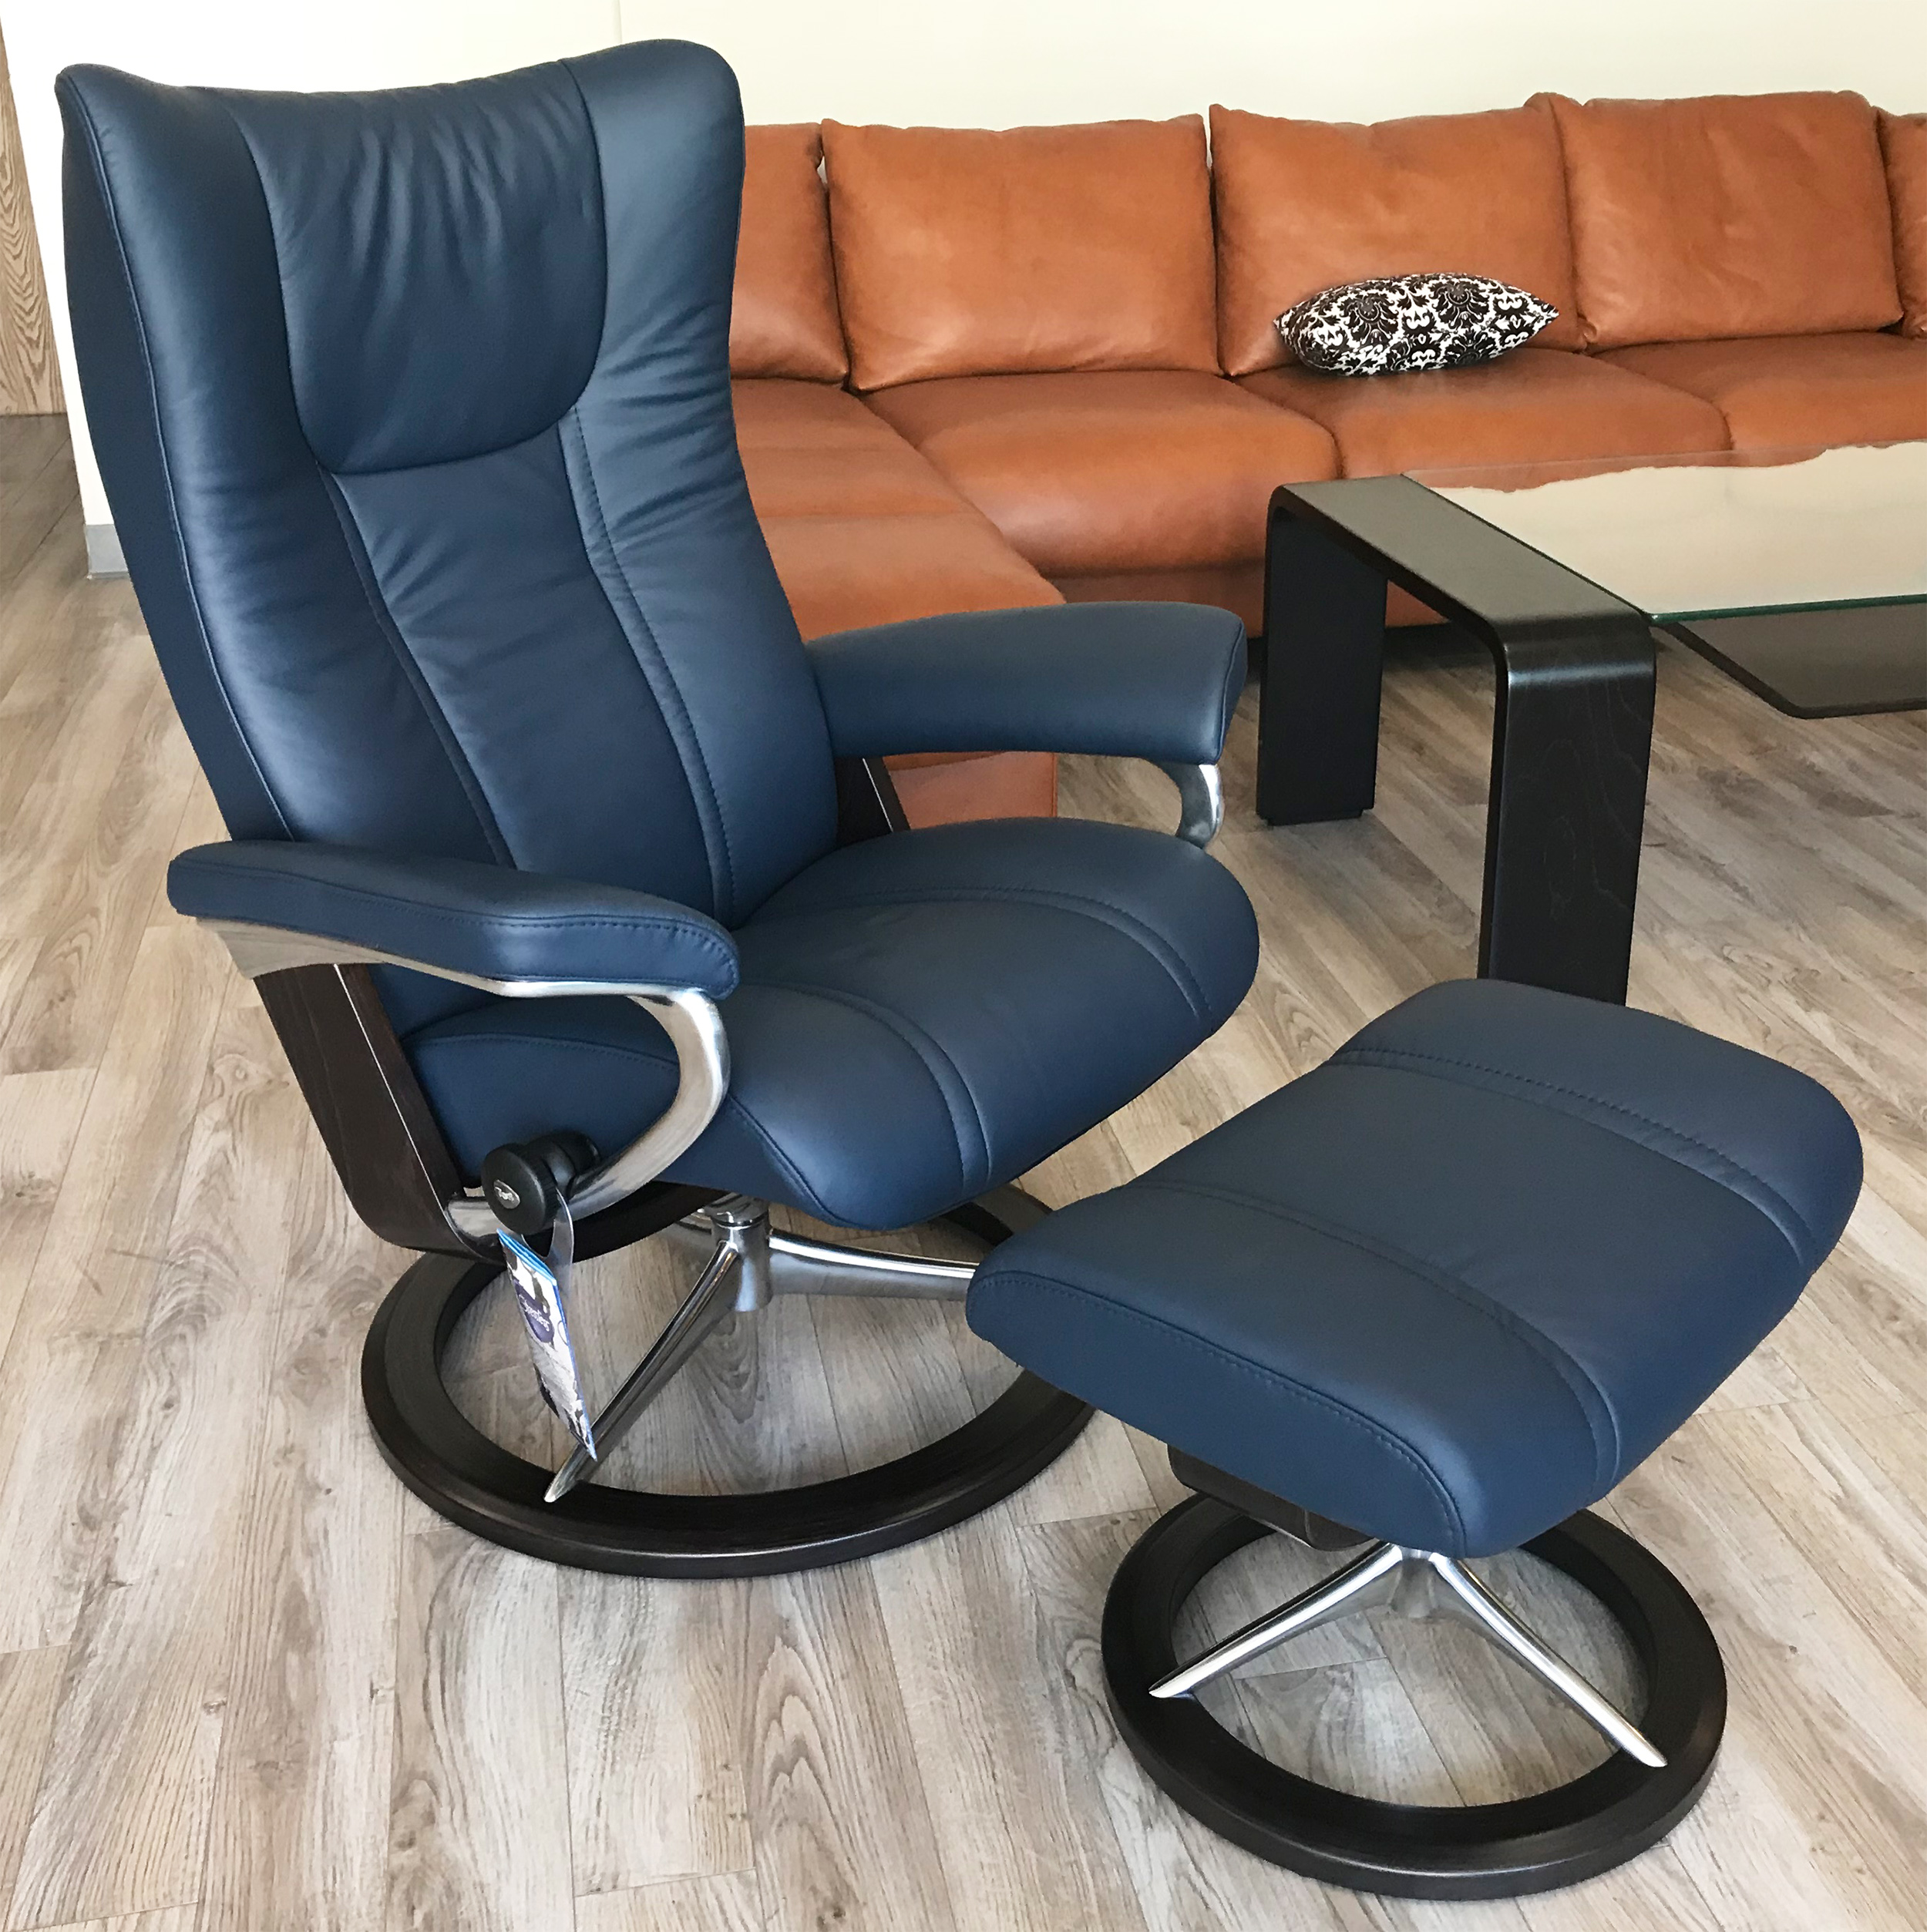 https://vitalityweb.com/Stressless-Chair/stressless_images/Stressless-Wing-Ekornes-Signature-Recliner-Chair-Ottoman-Paloma-Oxford-Blue-Leather.jpg